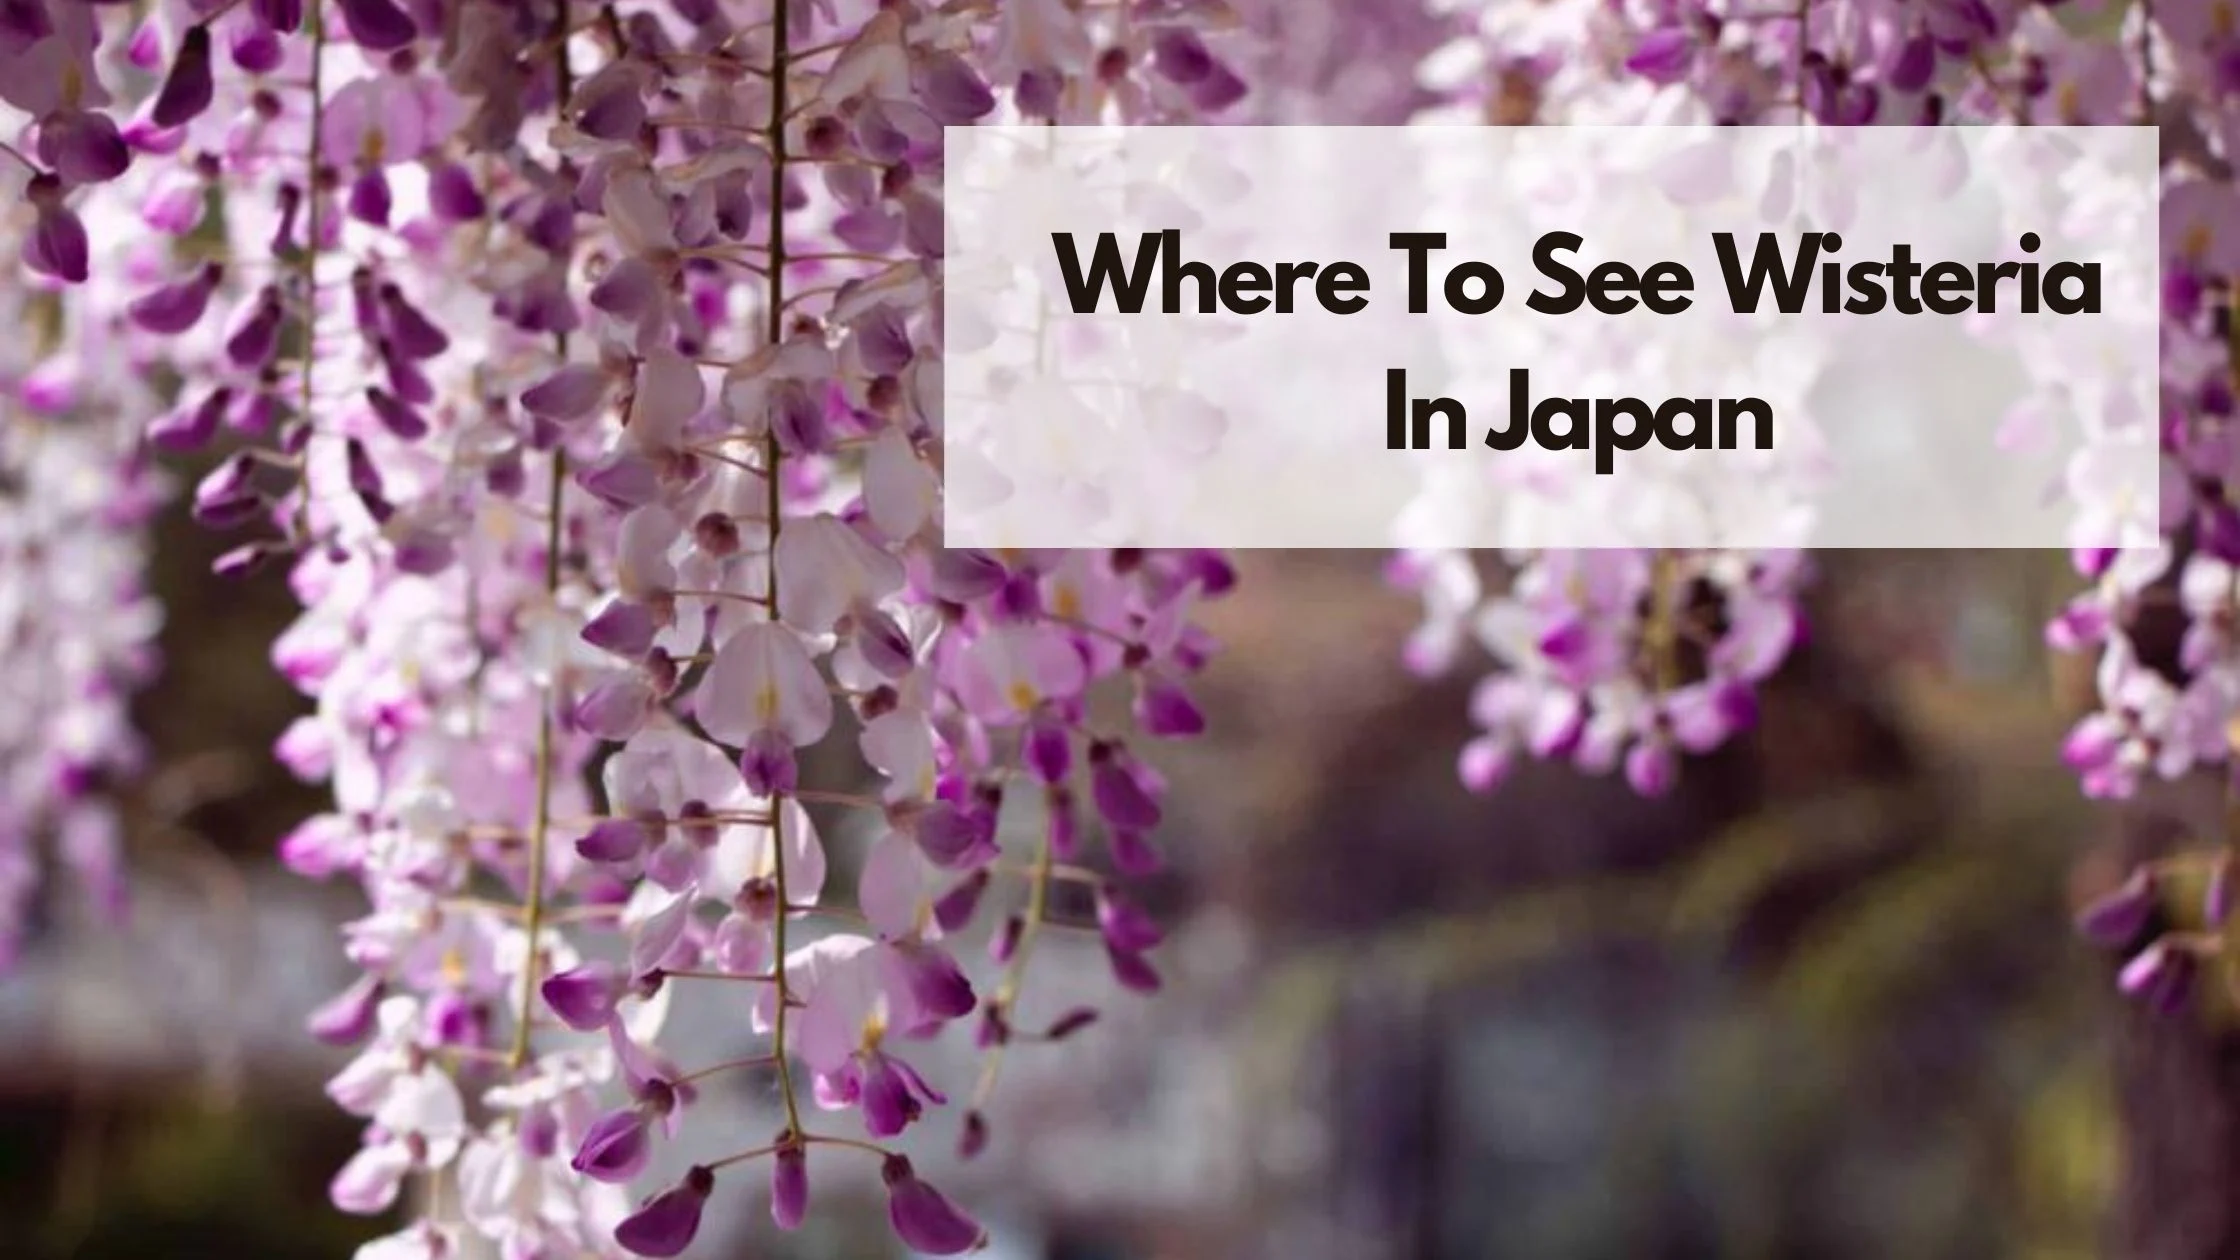 Where to see Wisteria in Japan